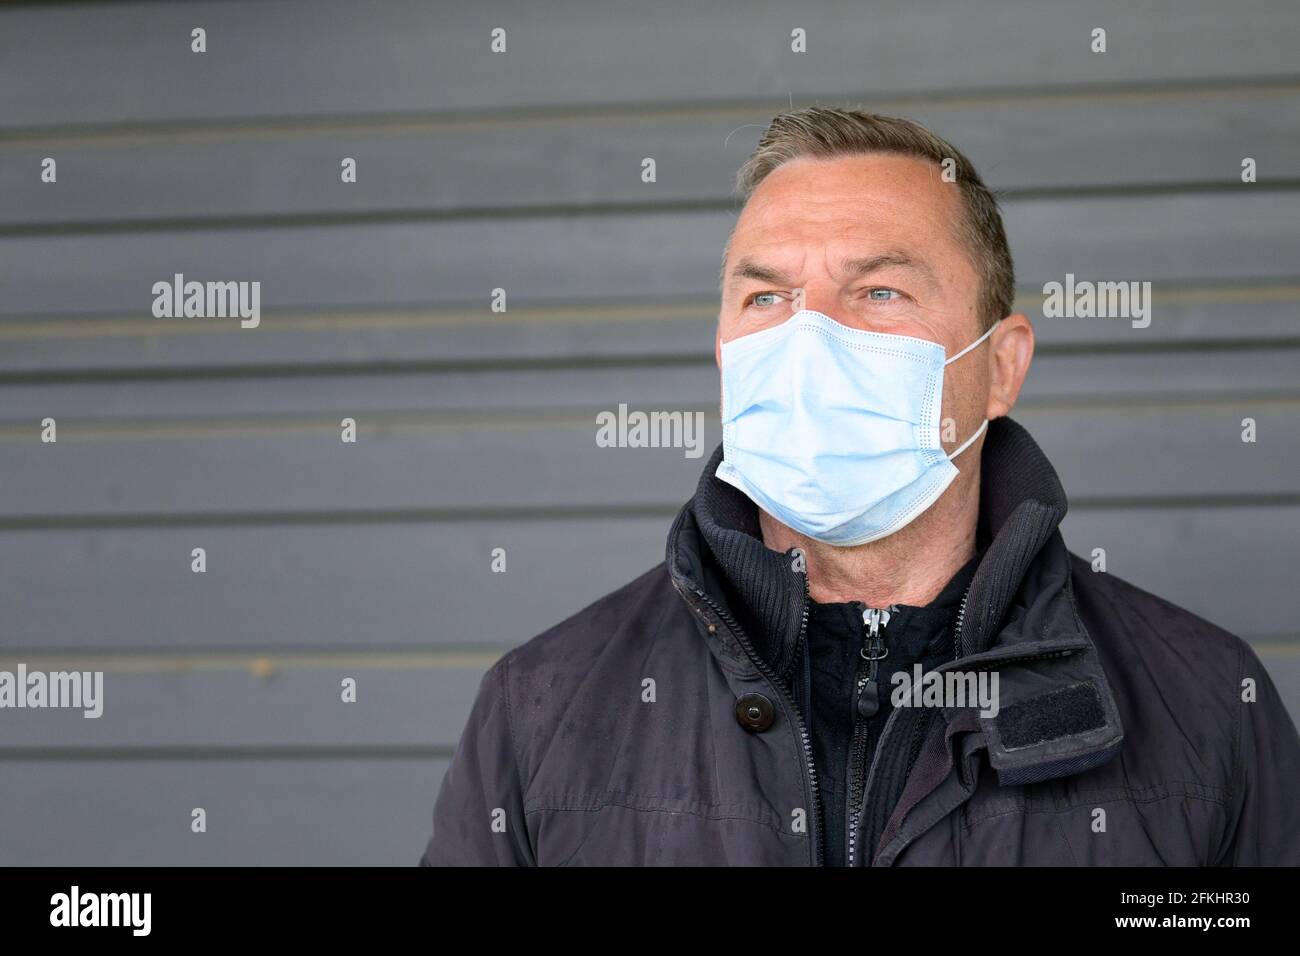 Thoughtful man wearing a protective face mask glancing to the side with a thoughtful expression as he poses outdoors against a grey wall during the Co Stock Photo